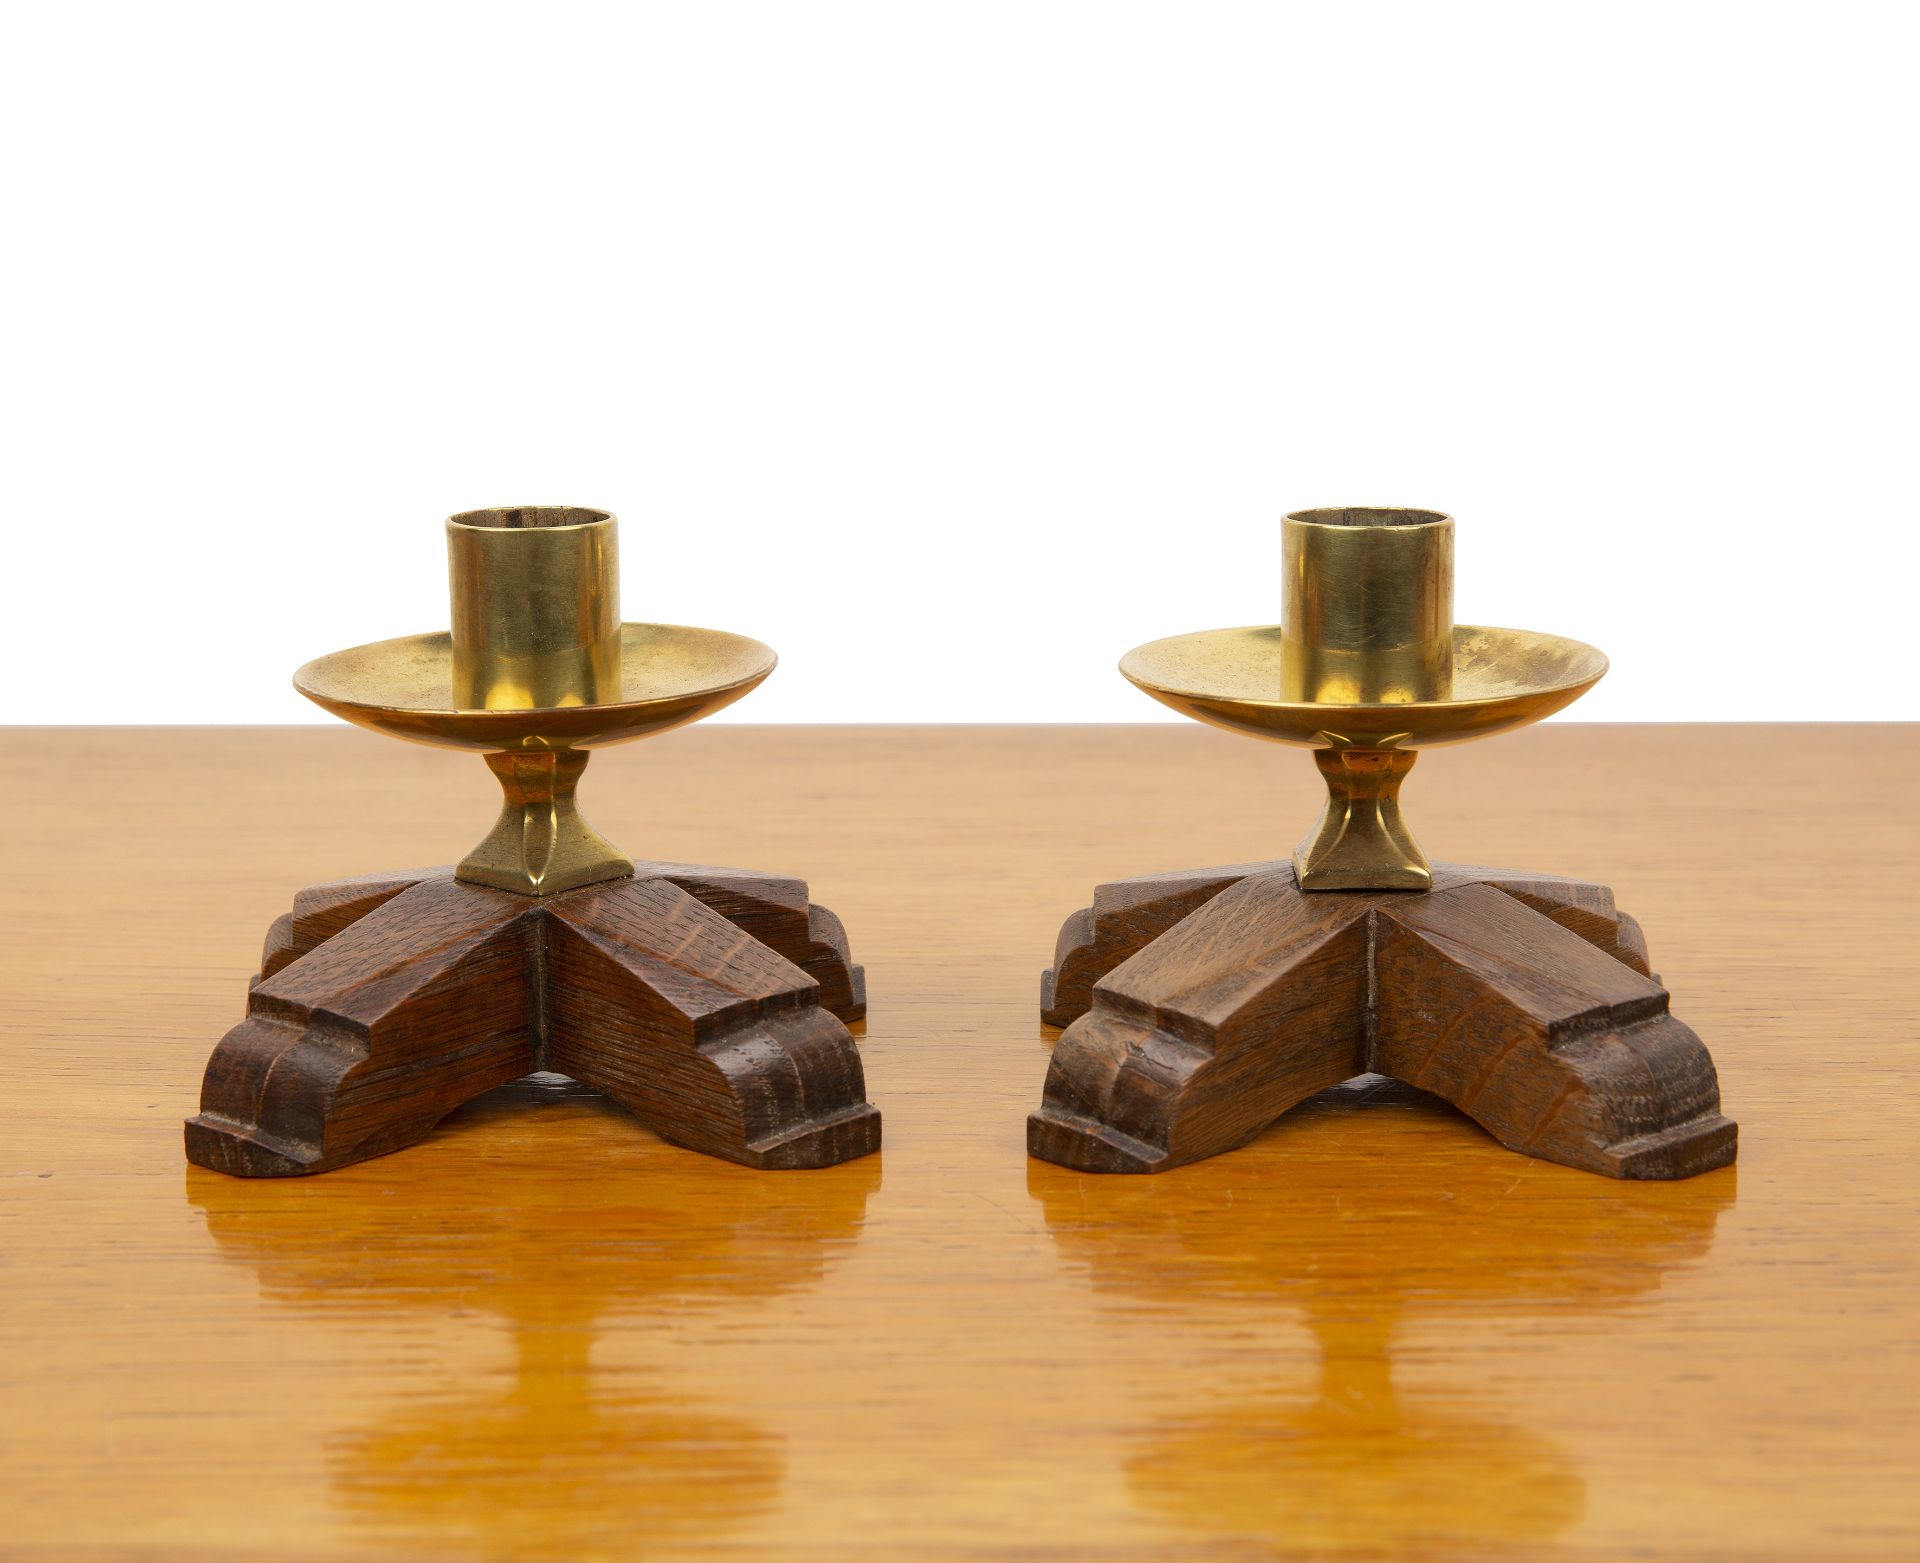 Gordon Russell Ltd of Broadway pair of oak and brass candlesticks, stamped 'Gordon Russell Ltd' to